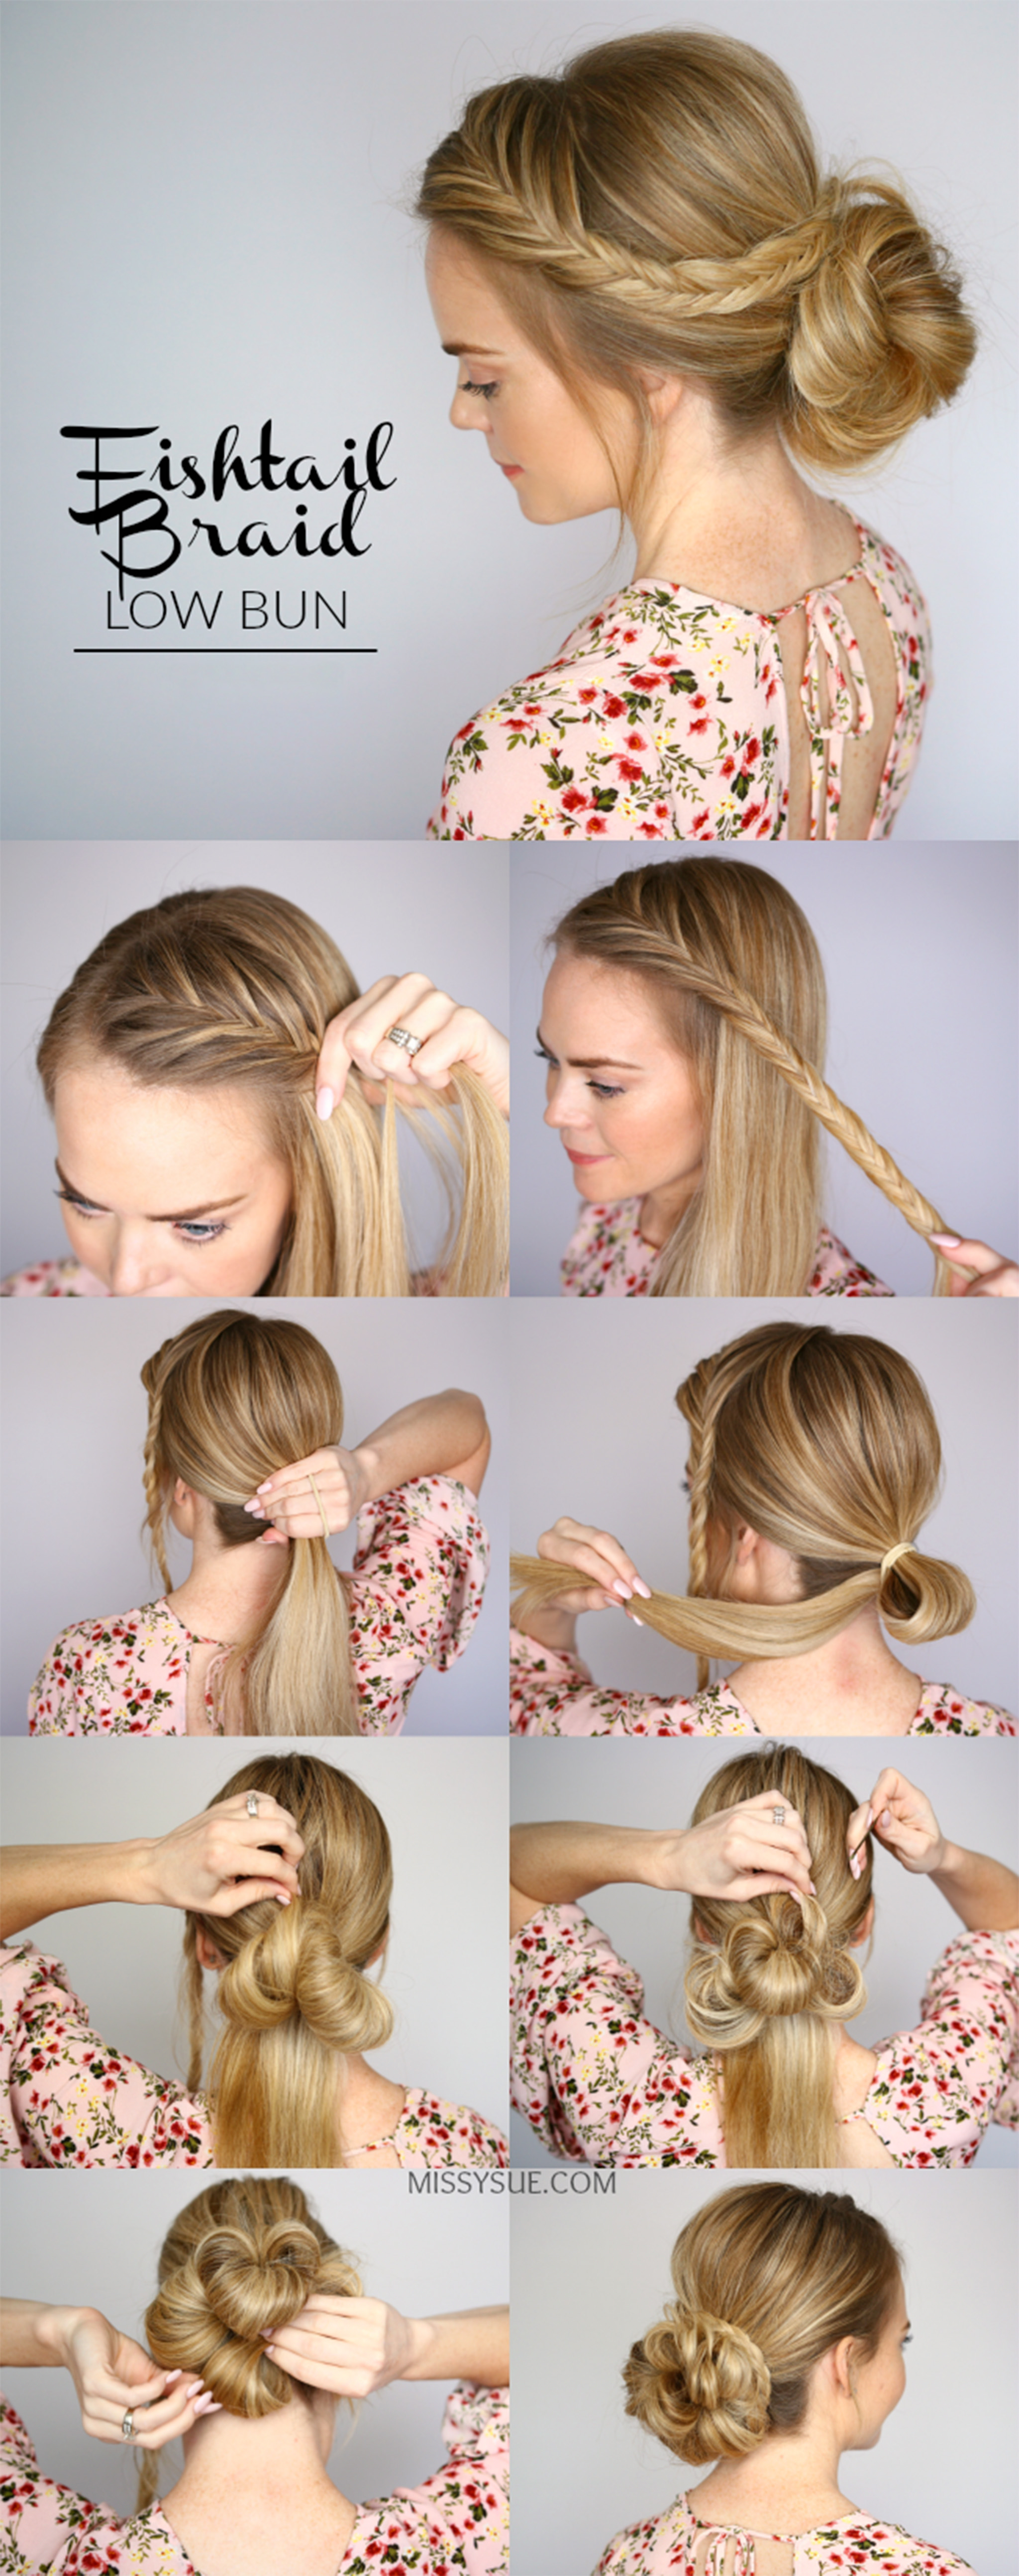 7 Easy Ways To Create A Braided Bun Hairstyle Under 5 Minutes!